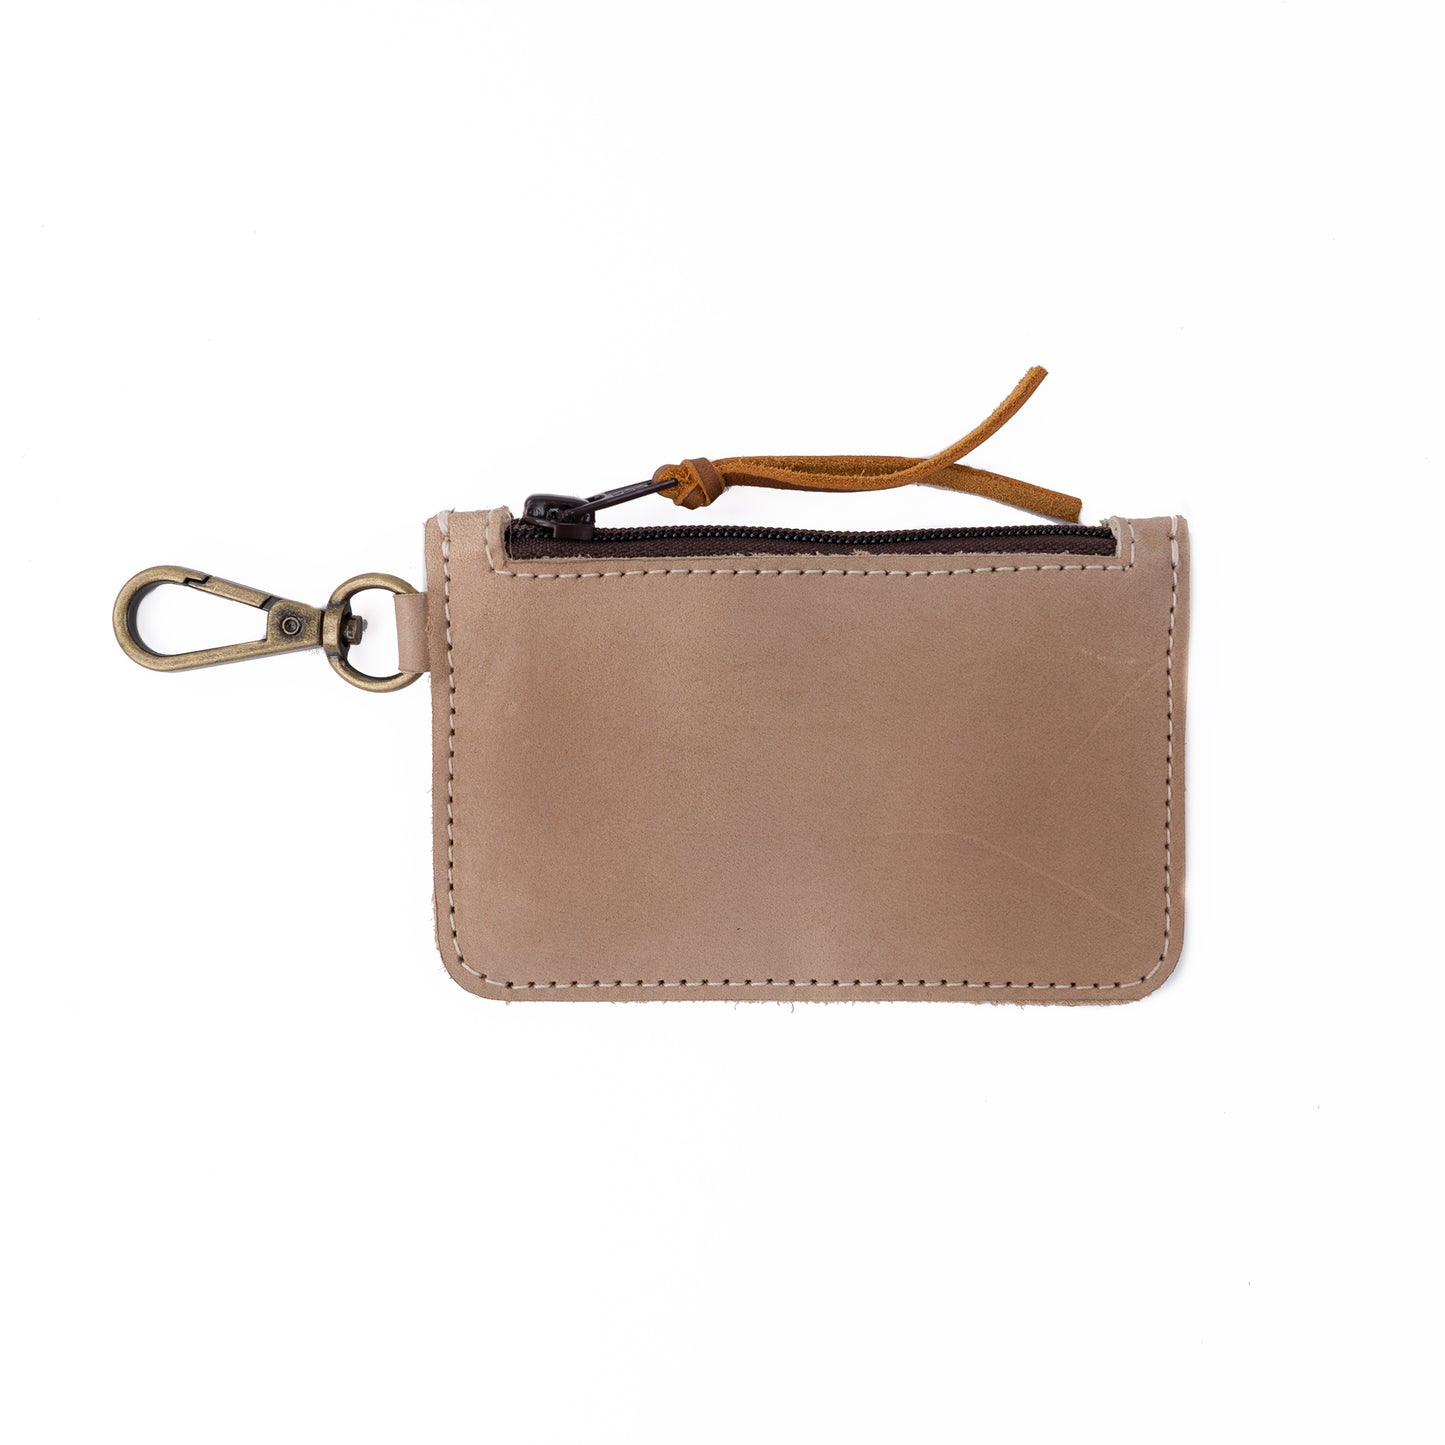 ZIPPED CARD CASE - FULL LEATHER - TAN & CAFE